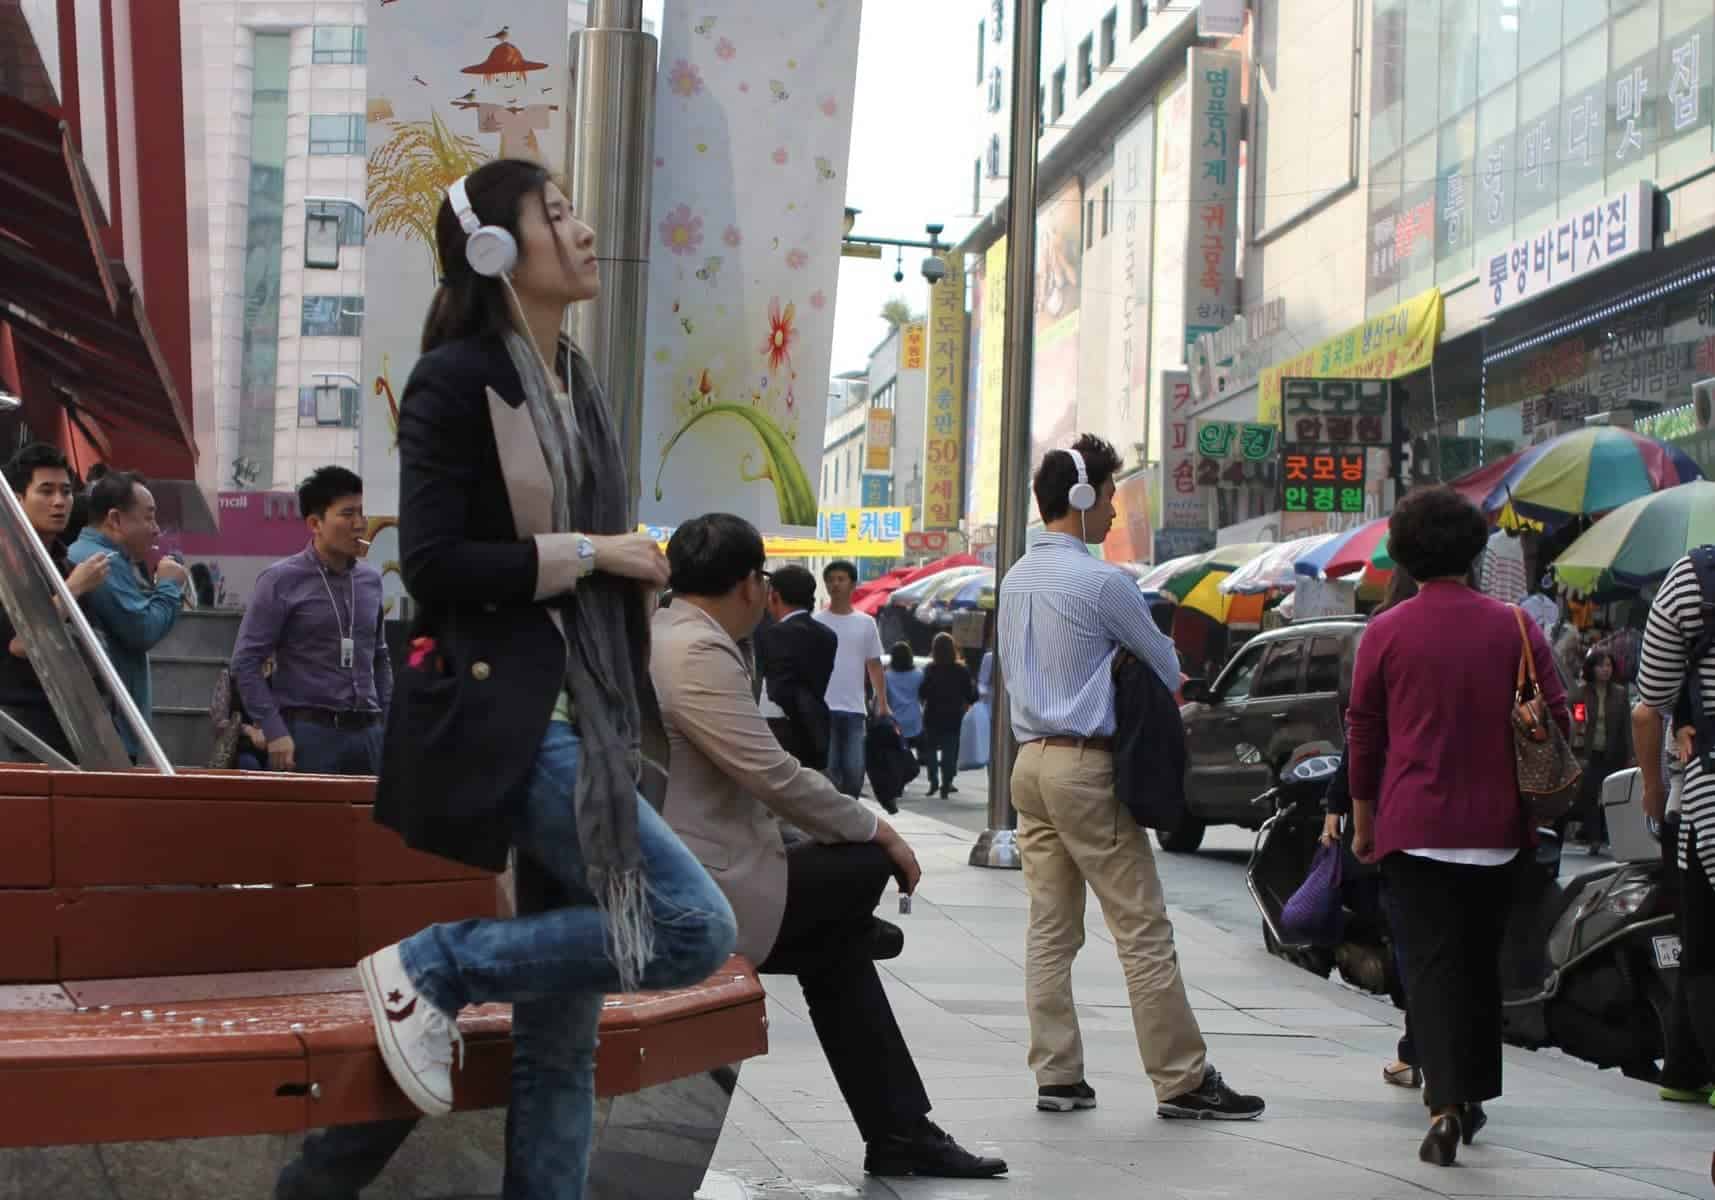 Participants being immersed in en route, when the work was presented in Seoul, South Korea.